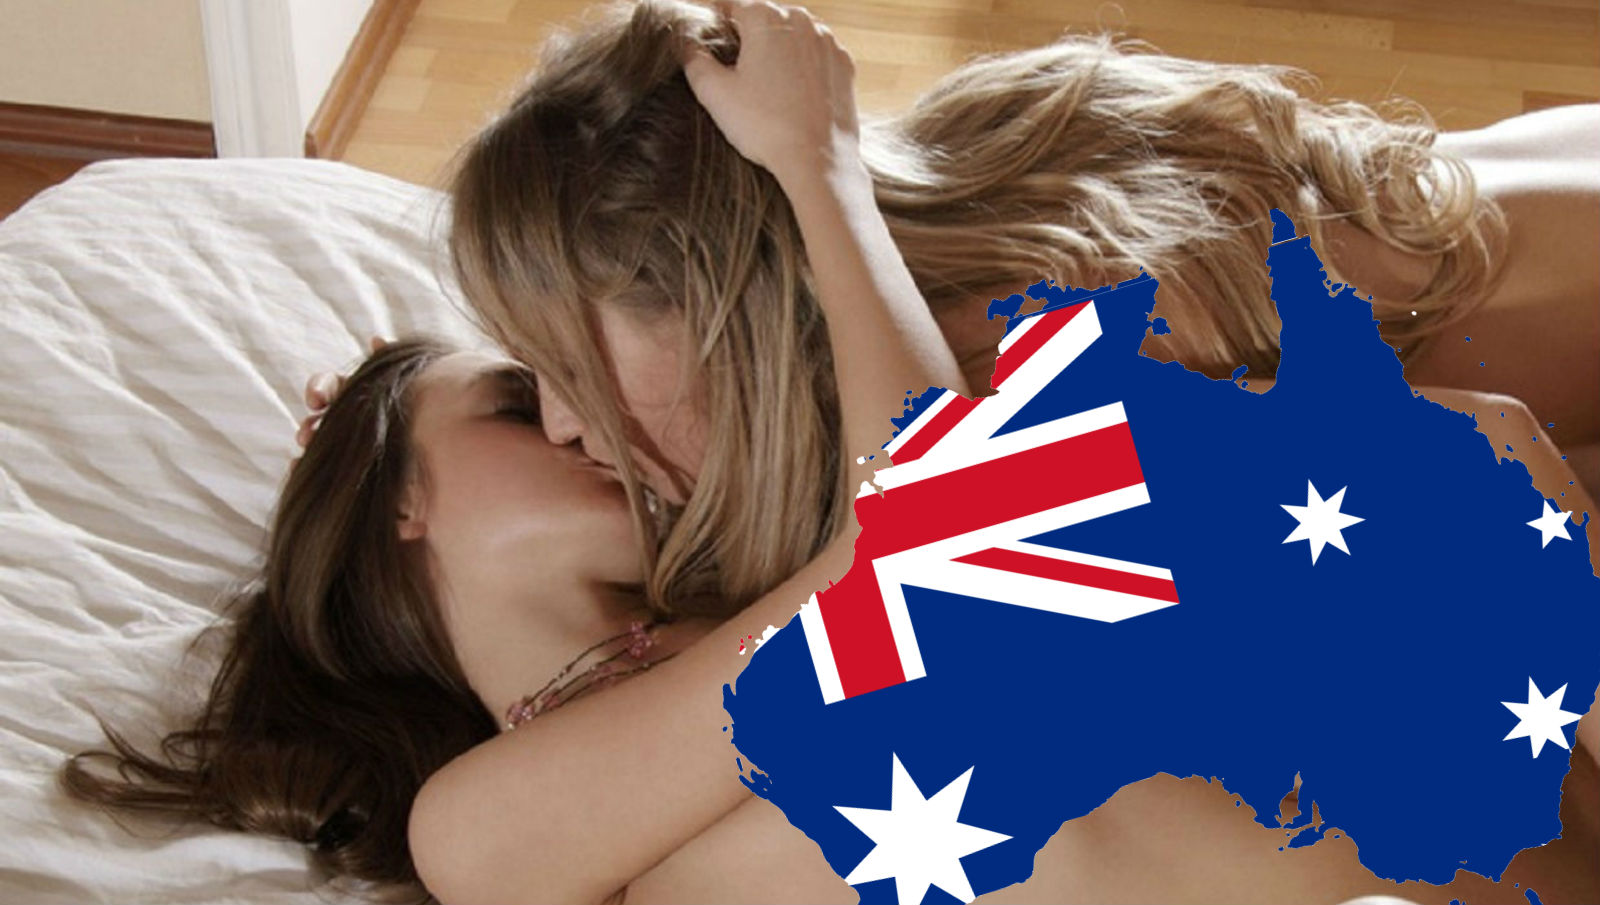 Australia watched a ton of lesbian porn while blocking their right to marry  | PinkNews